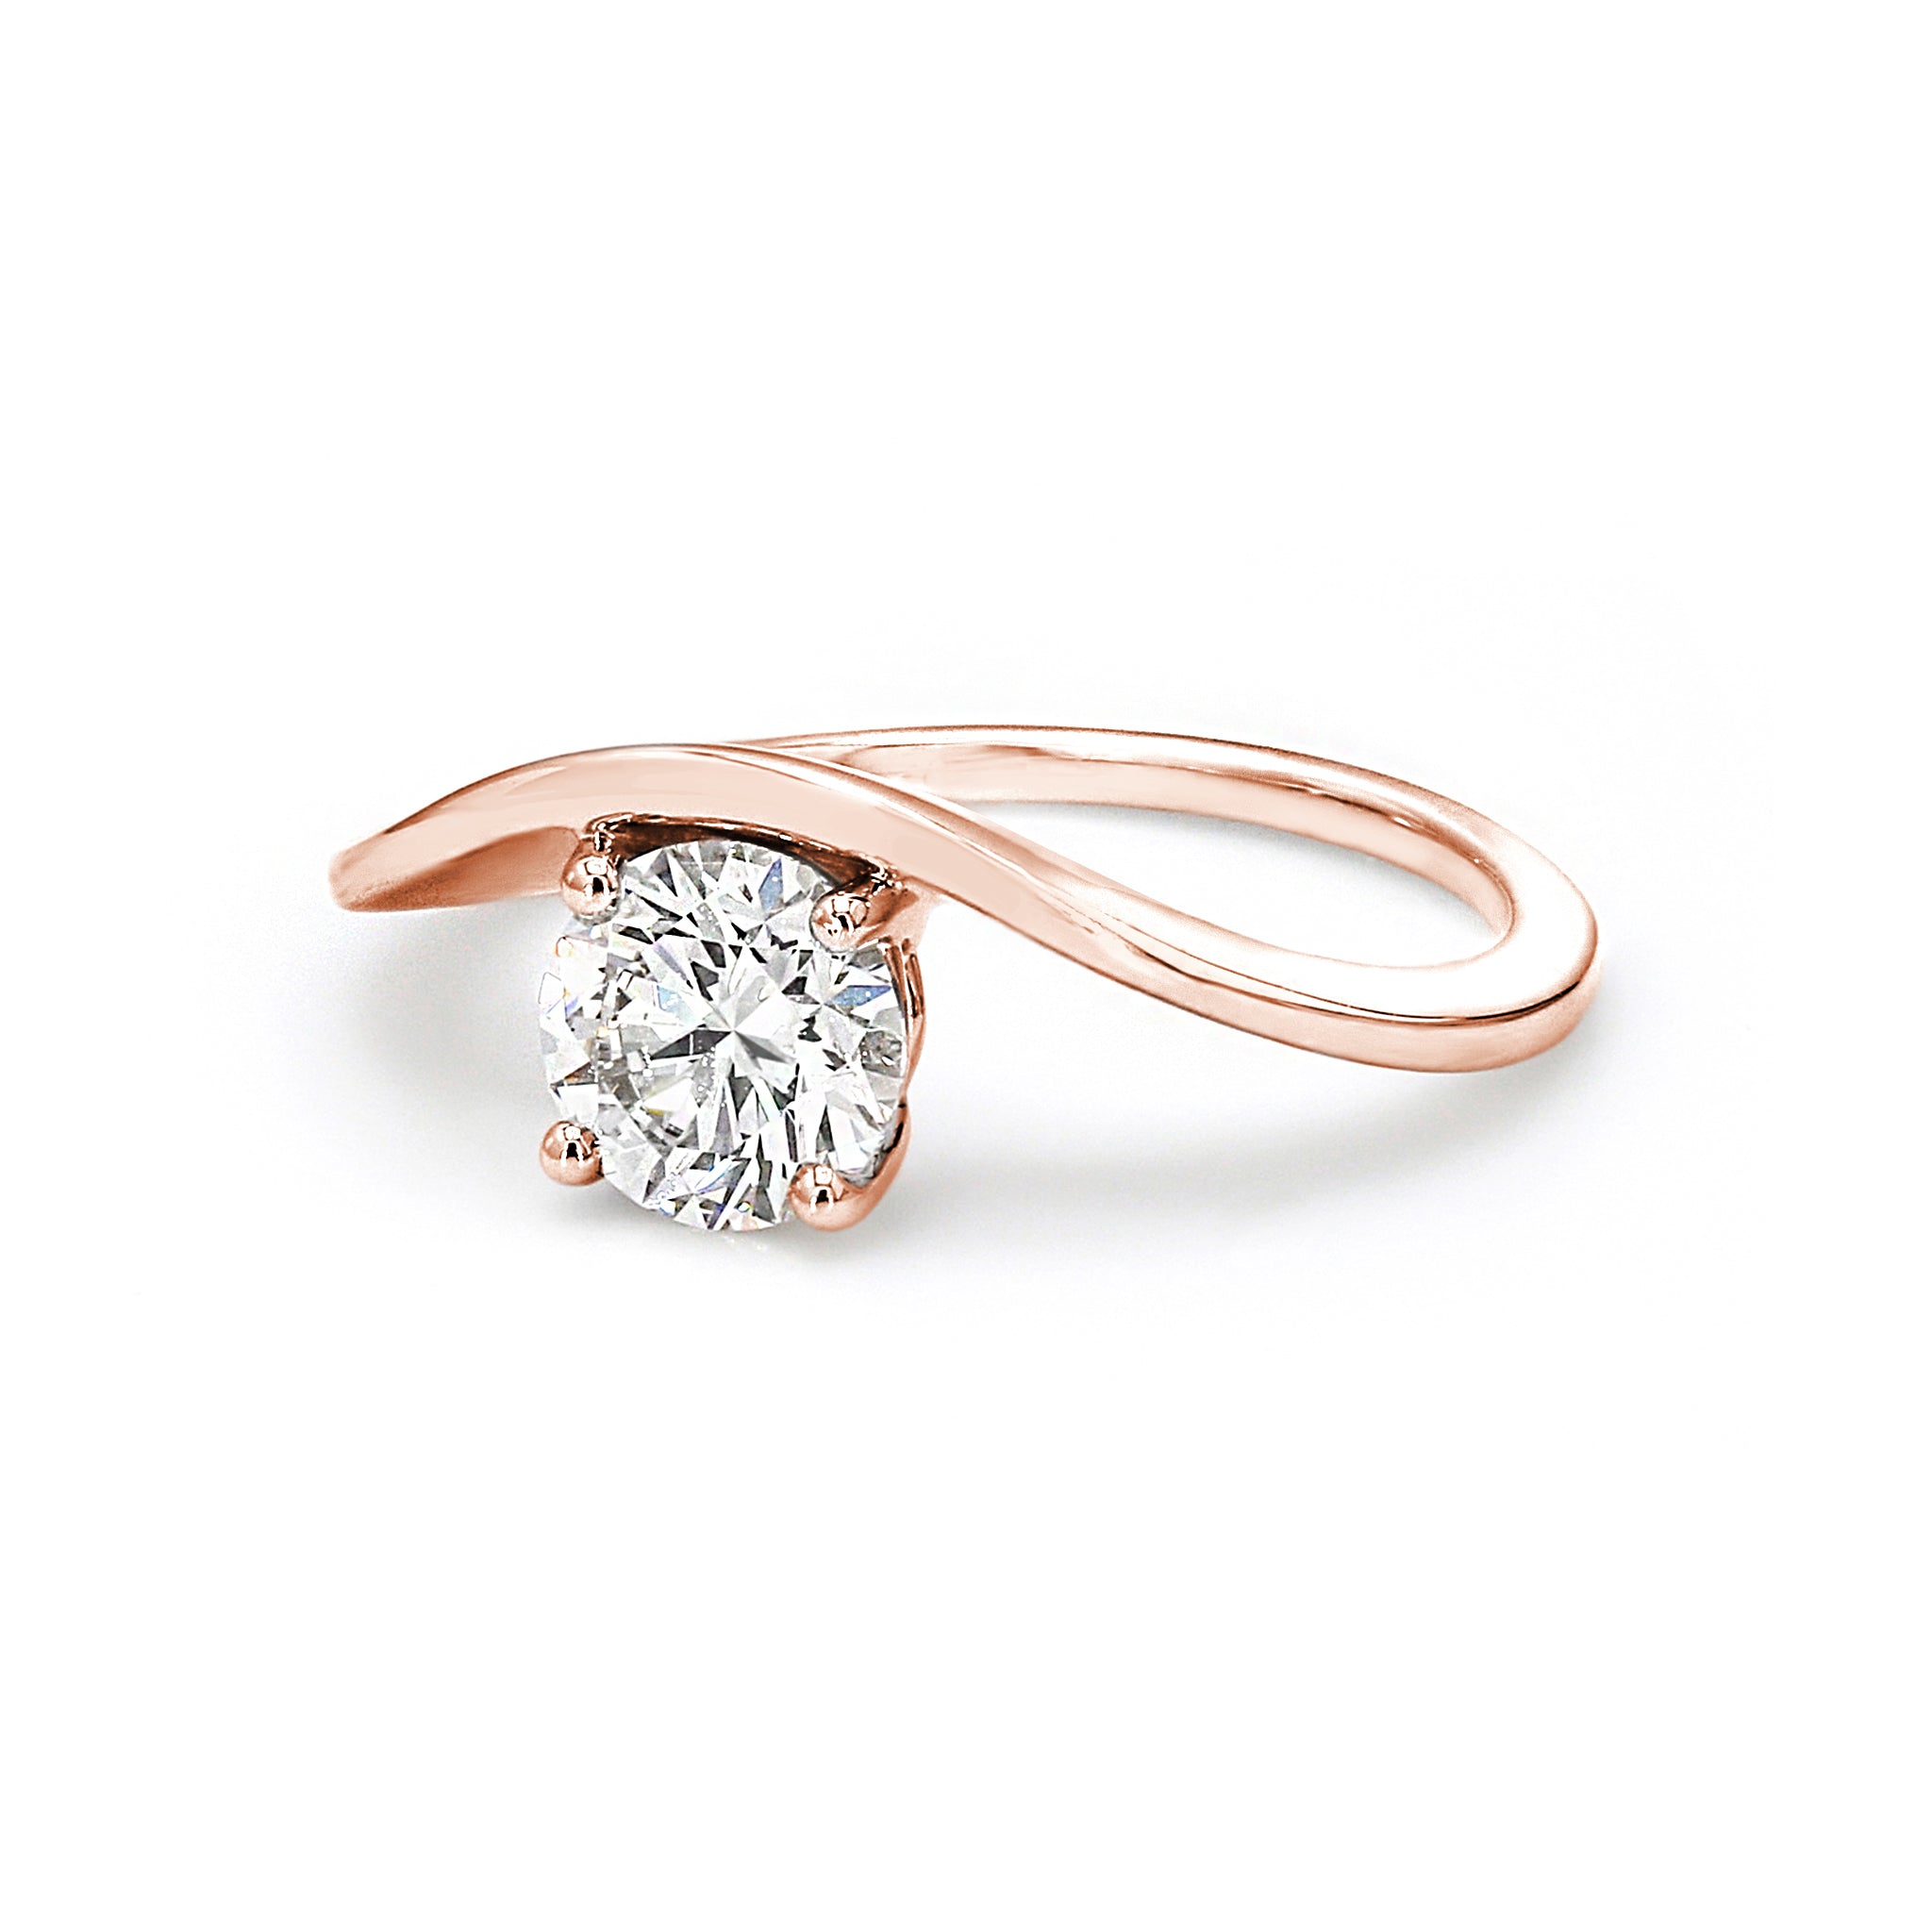 Shimansky - Silhouette Diamond Engagement Ring 1.00ct Crafted in 18K Rose Gold